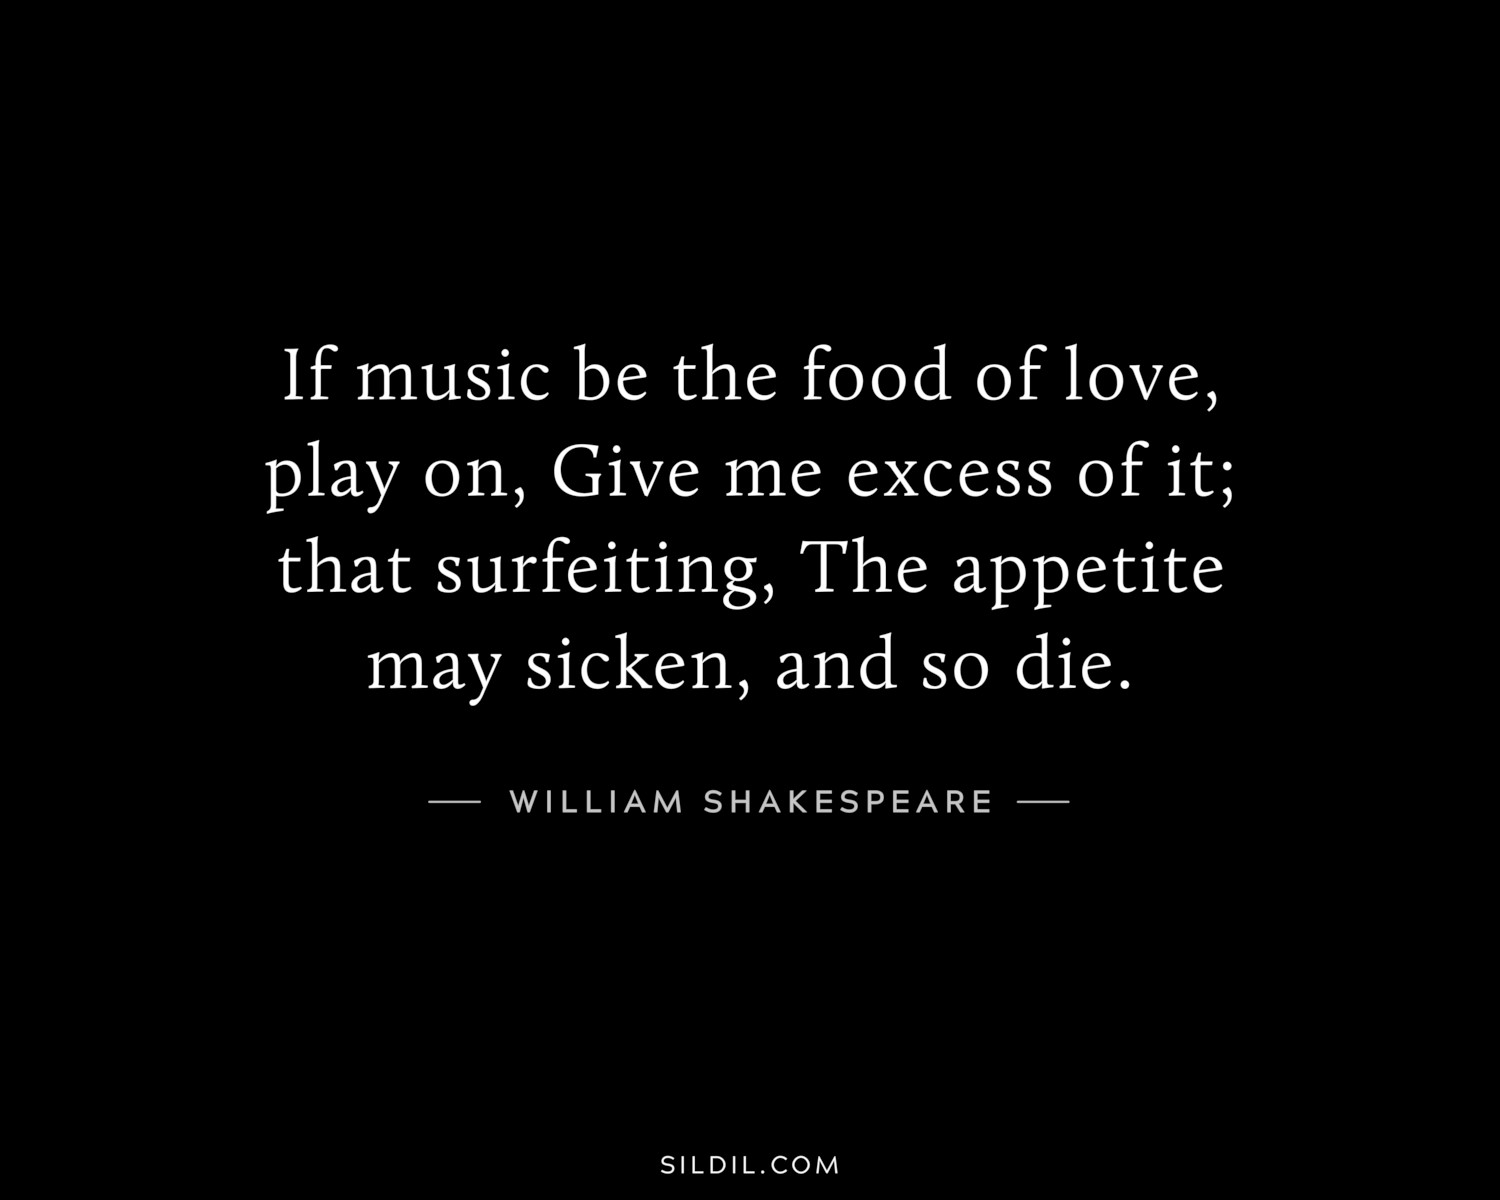 If music be the food of love, play on, Give me excess of it; that surfeiting, The appetite may sicken, and so die.